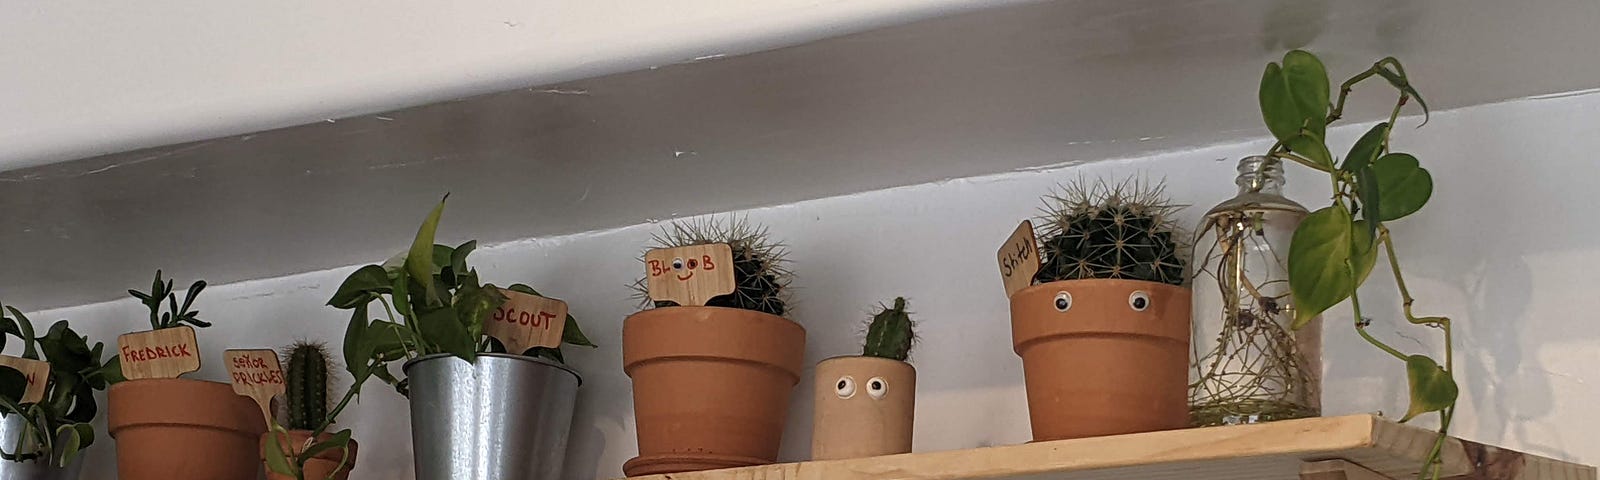 A bunch of planters with small plants sit on a wooden shelf. Many of the planters have googly eyes or signs with cute phrases on them.